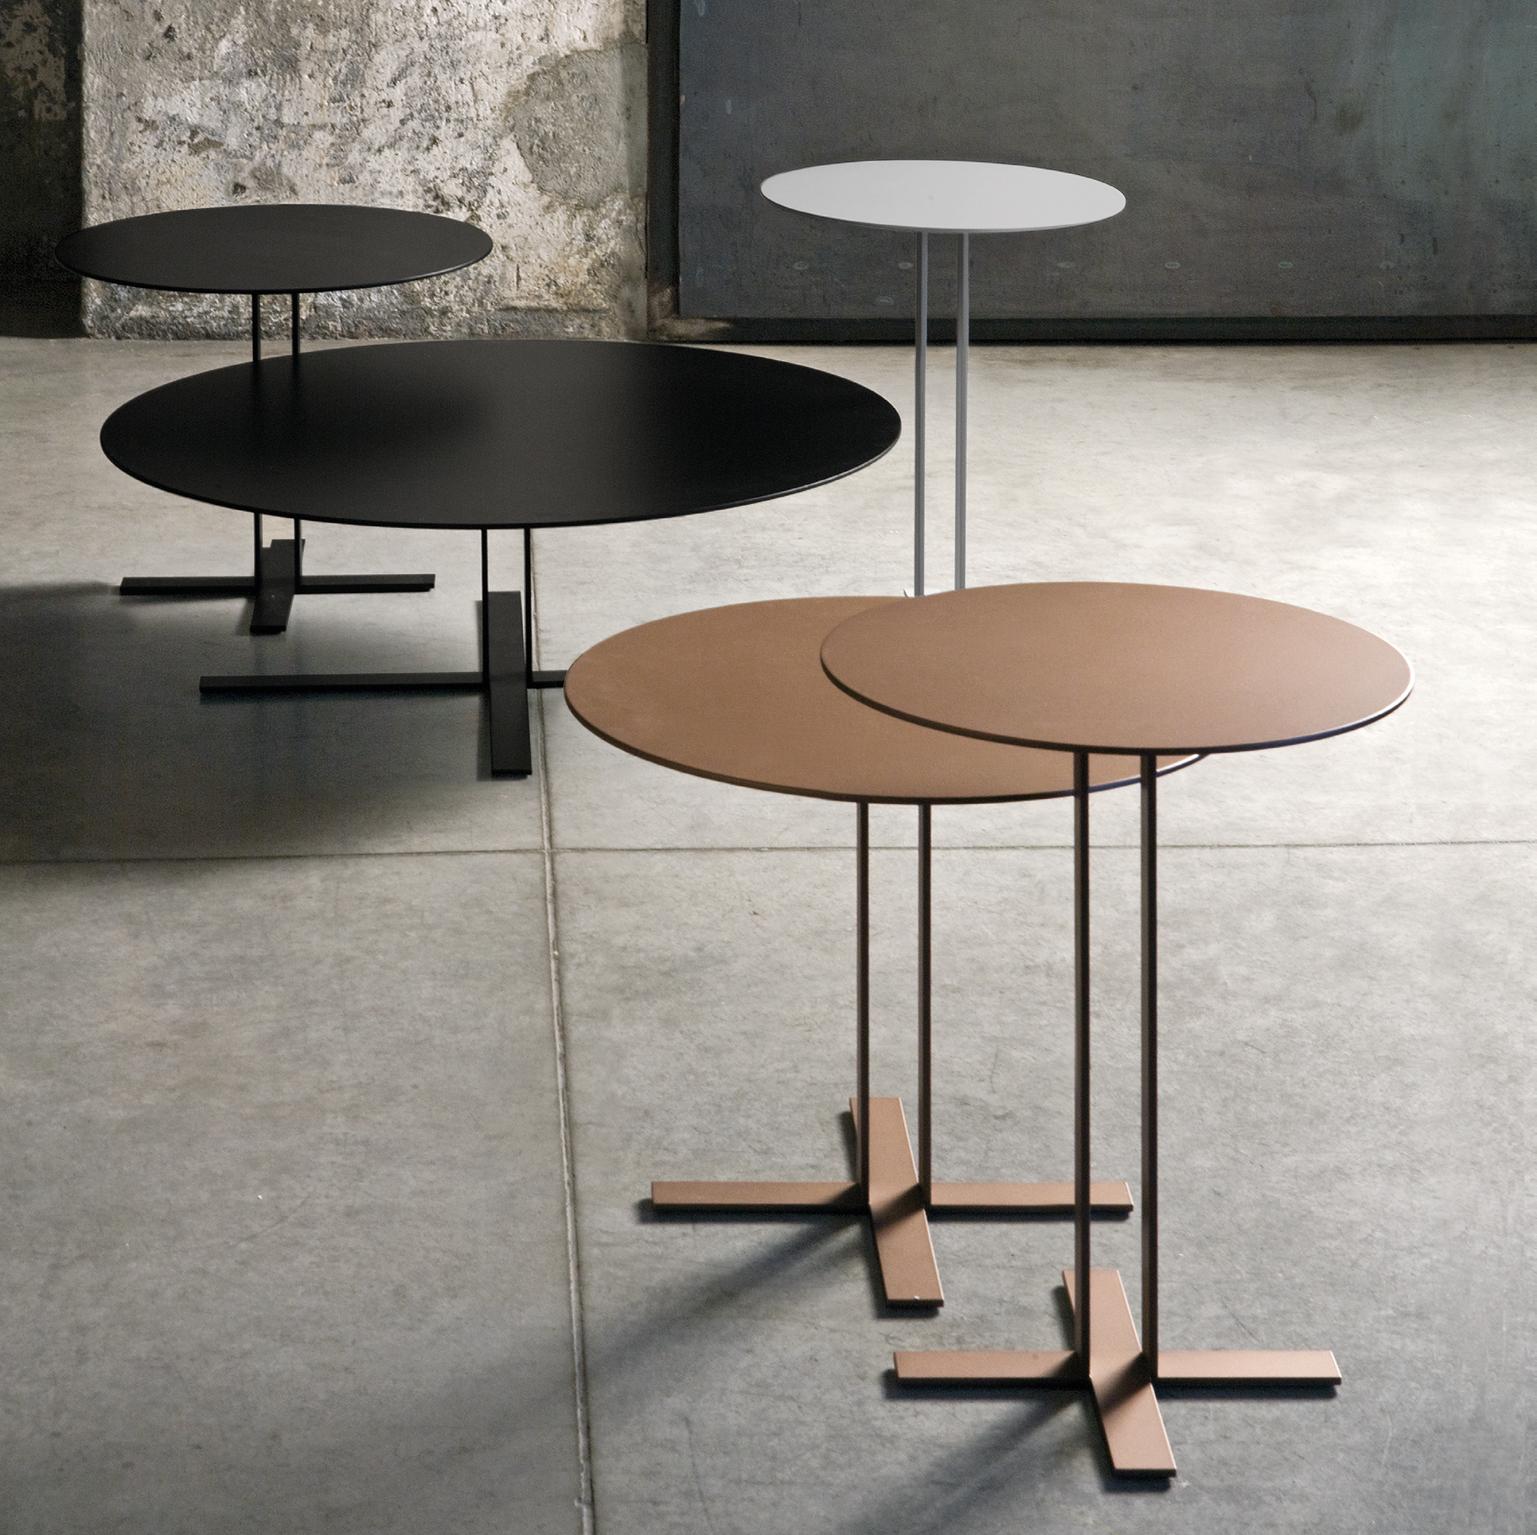 A light, crisp and stylish table with a strong, clean design and an elegant, dainty spirit. Metal base and MDF top. Available in a matt lacquered finish.

The designer Giuseppe Viganò is dedicated to the industrial design of furniture products and